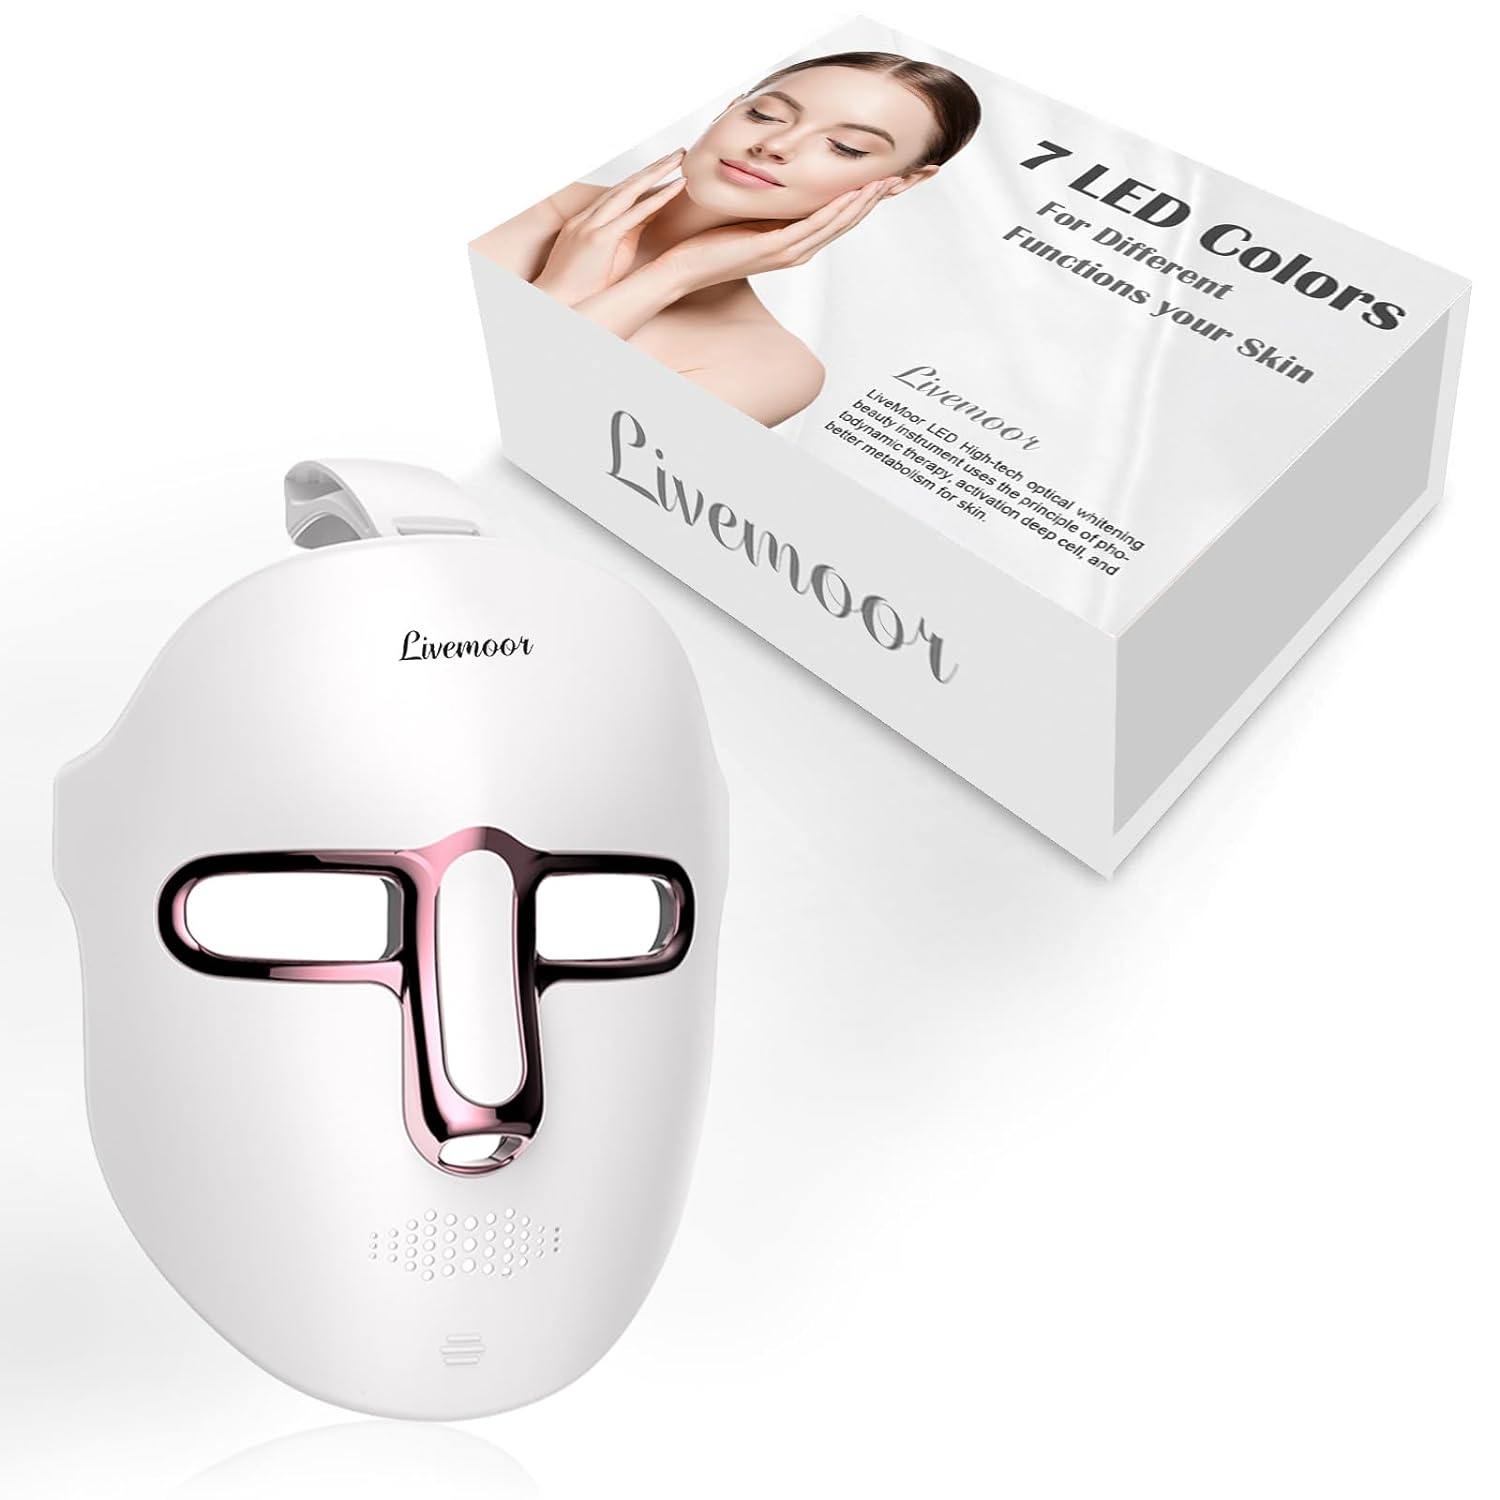 SDKWDH Led Face Mask Light Therapy At Home, Red Light Therapy Mask for Face, 7 Colors LED Face Mask Light Therapy